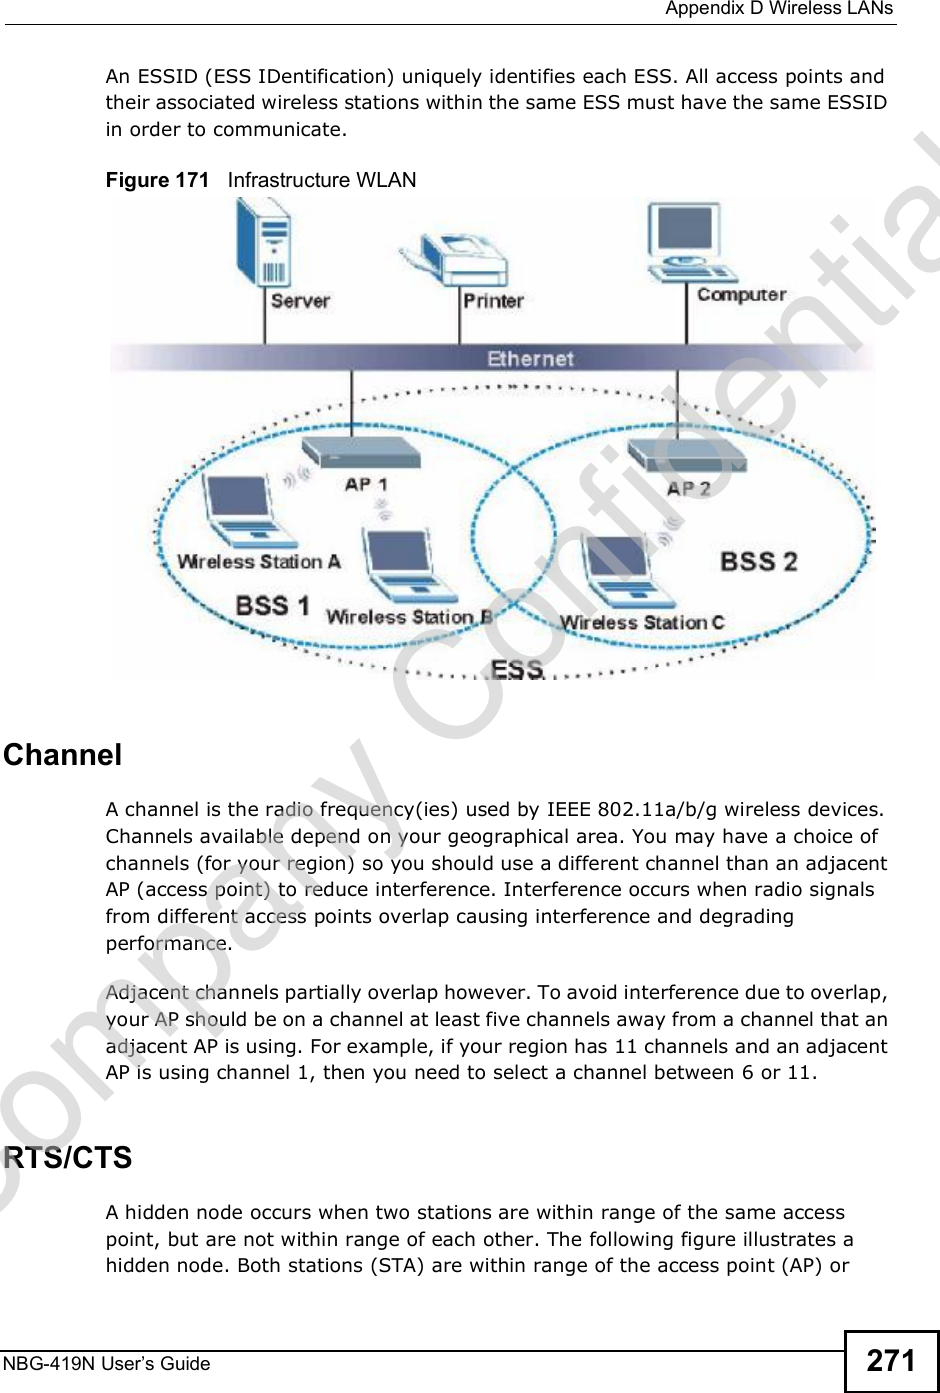  Appendix DWireless LANsNBG-419N User s Guide 271An ESSID (ESS IDentification) uniquely identifies each ESS. All access points and their associated wireless stations within the same ESS must have the same ESSID in order to communicate.Figure 171   Infrastructure WLANChannelA channel is the radio frequency(ies) used by IEEE 802.11a/b/g wireless devices. Channels available depend on your geographical area. You may have a choice of channels (for your region) so you should use a different channel than an adjacent AP (access point) to reduce interference. Interference occurs when radio signals from different access points overlap causing interference and degrading performance.Adjacent channels partially overlap however. To avoid interference due to overlap, your AP should be on a channel at least five channels away from a channel that an adjacent AP is using. For example, if your region has 11 channels and an adjacent AP is using channel 1, then you need to select a channel between 6 or 11.RTS/CTSA hidden node occurs when two stations are within range of the same access point, but are not within range of each other. The following figure illustrates a hidden node. Both stations (STA) are within range of the access point (AP) or Company Confidential